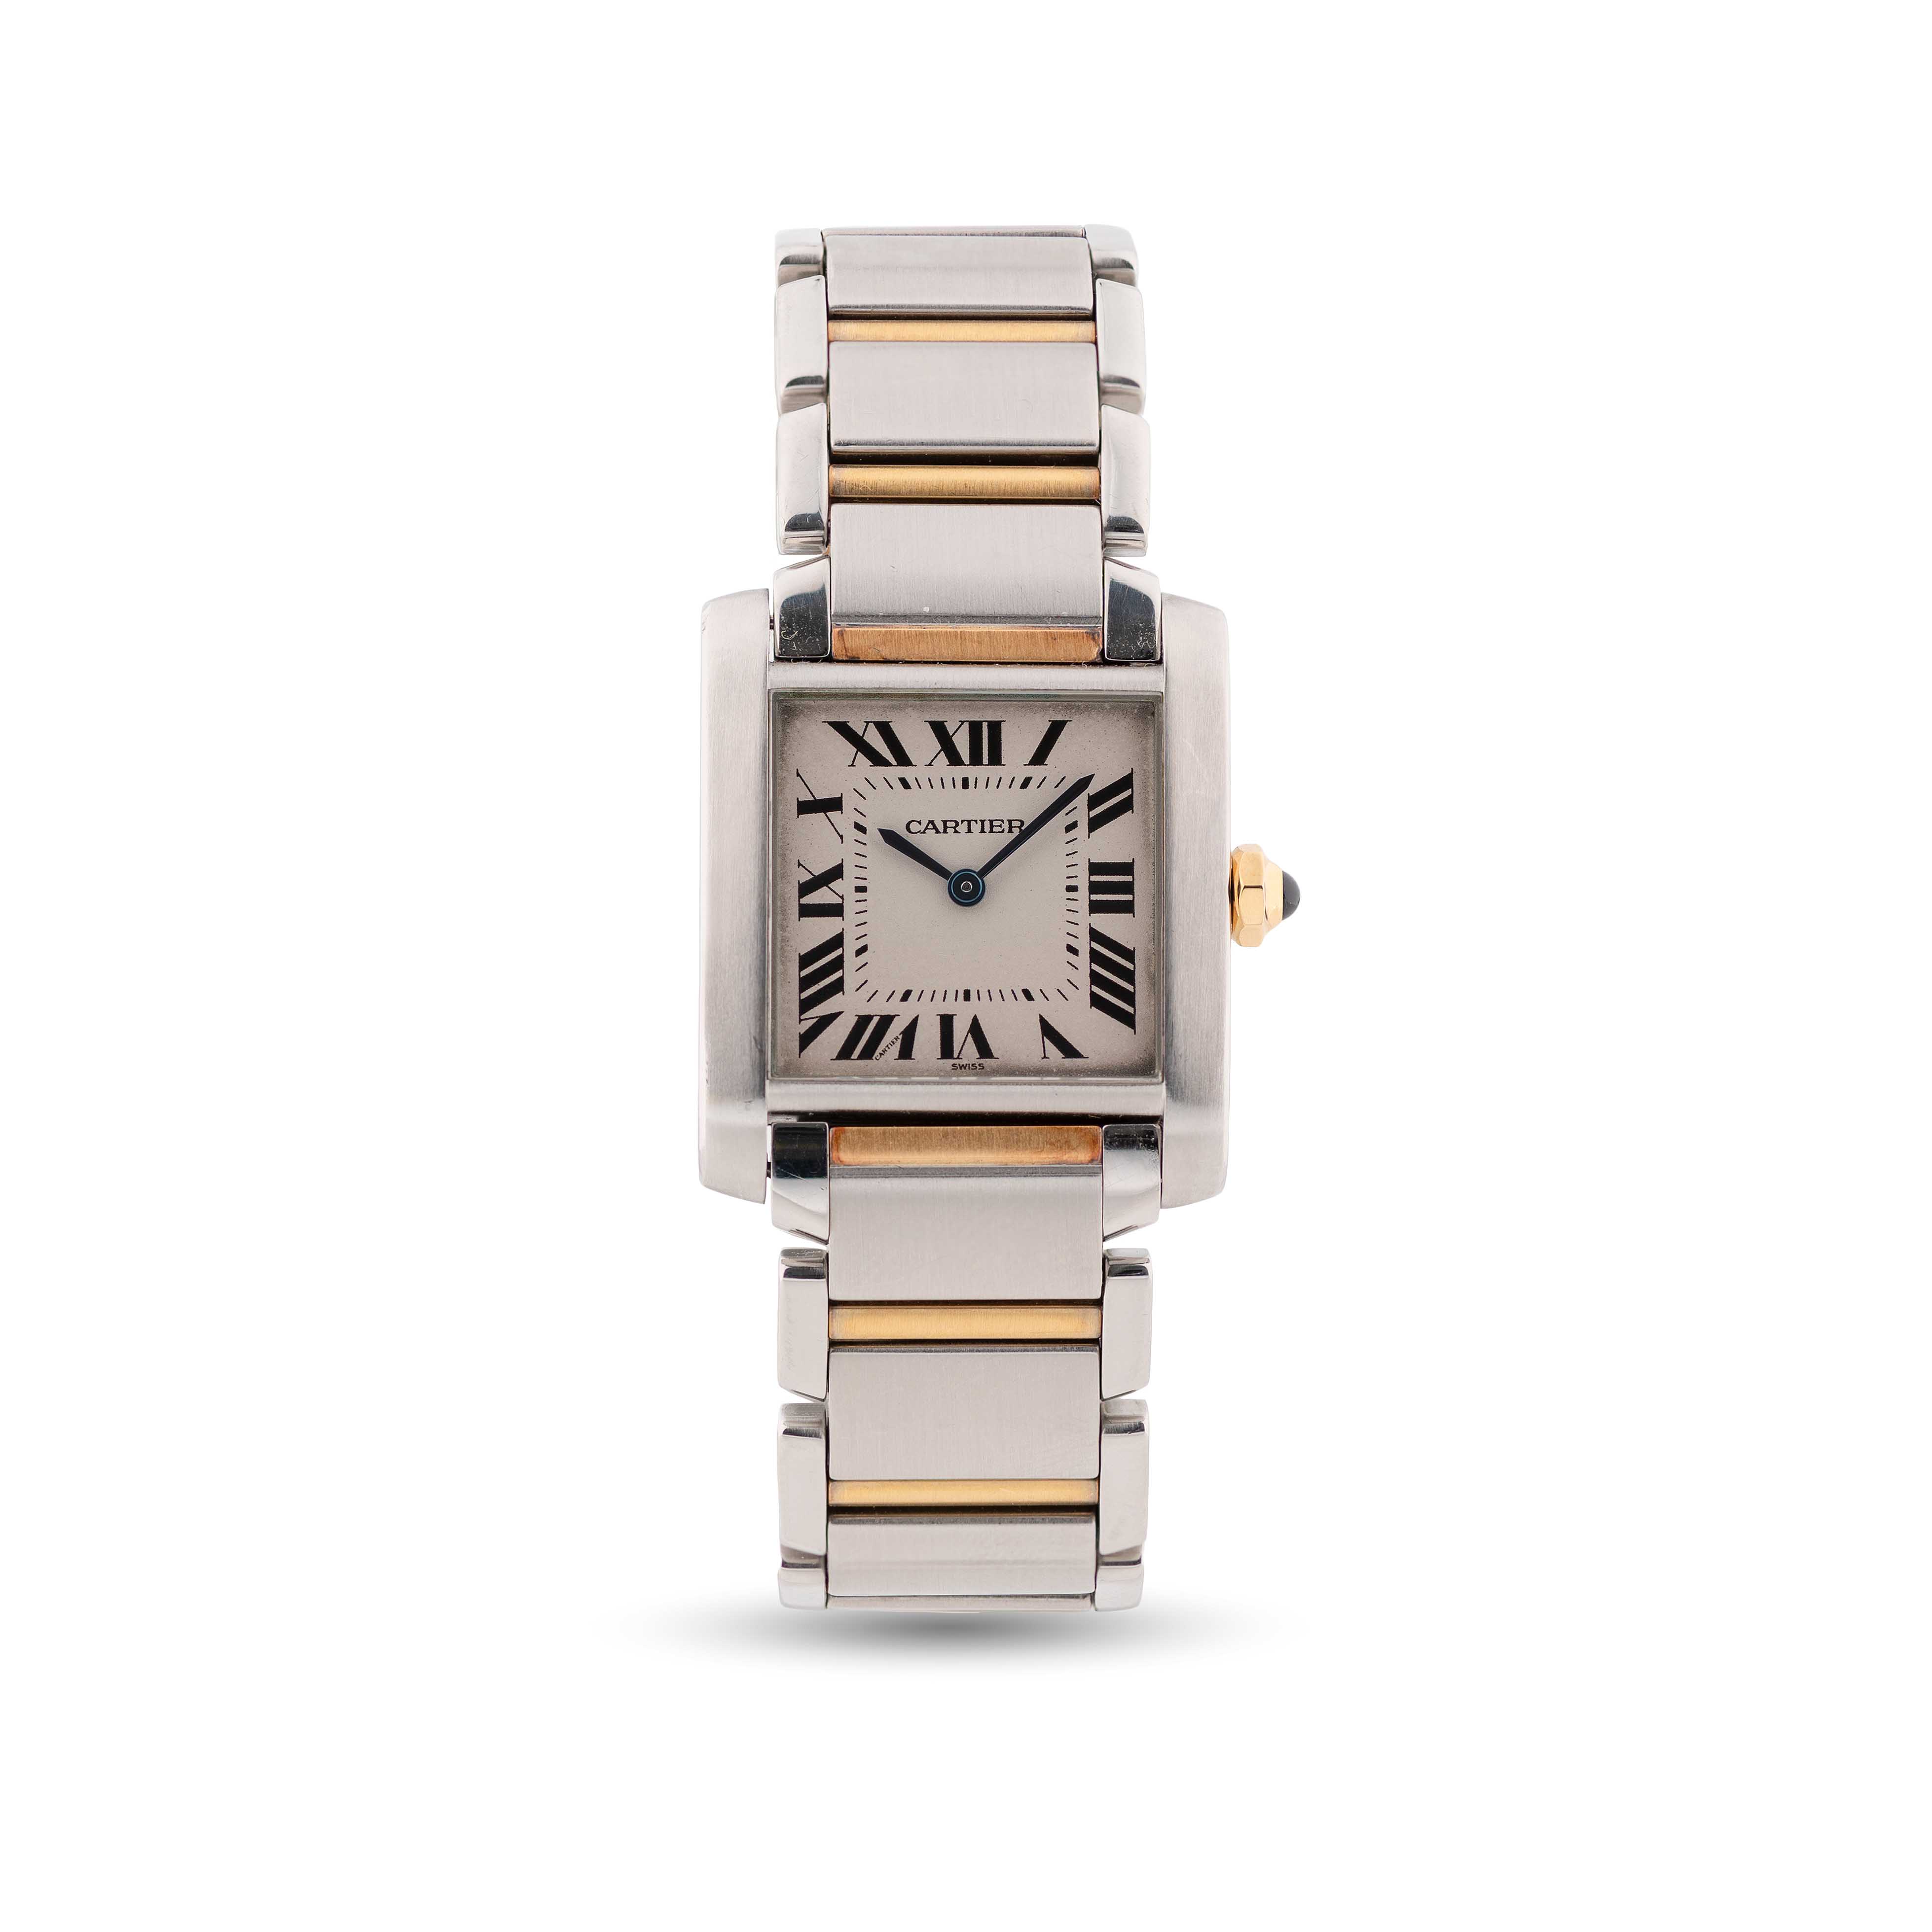 A MIDSIZE STAINLESS STEEL & GOLD CARTIER TANK FRANCAISE BRACELET WATCH DATED 1997, REF. 2301 - Image 2 of 2